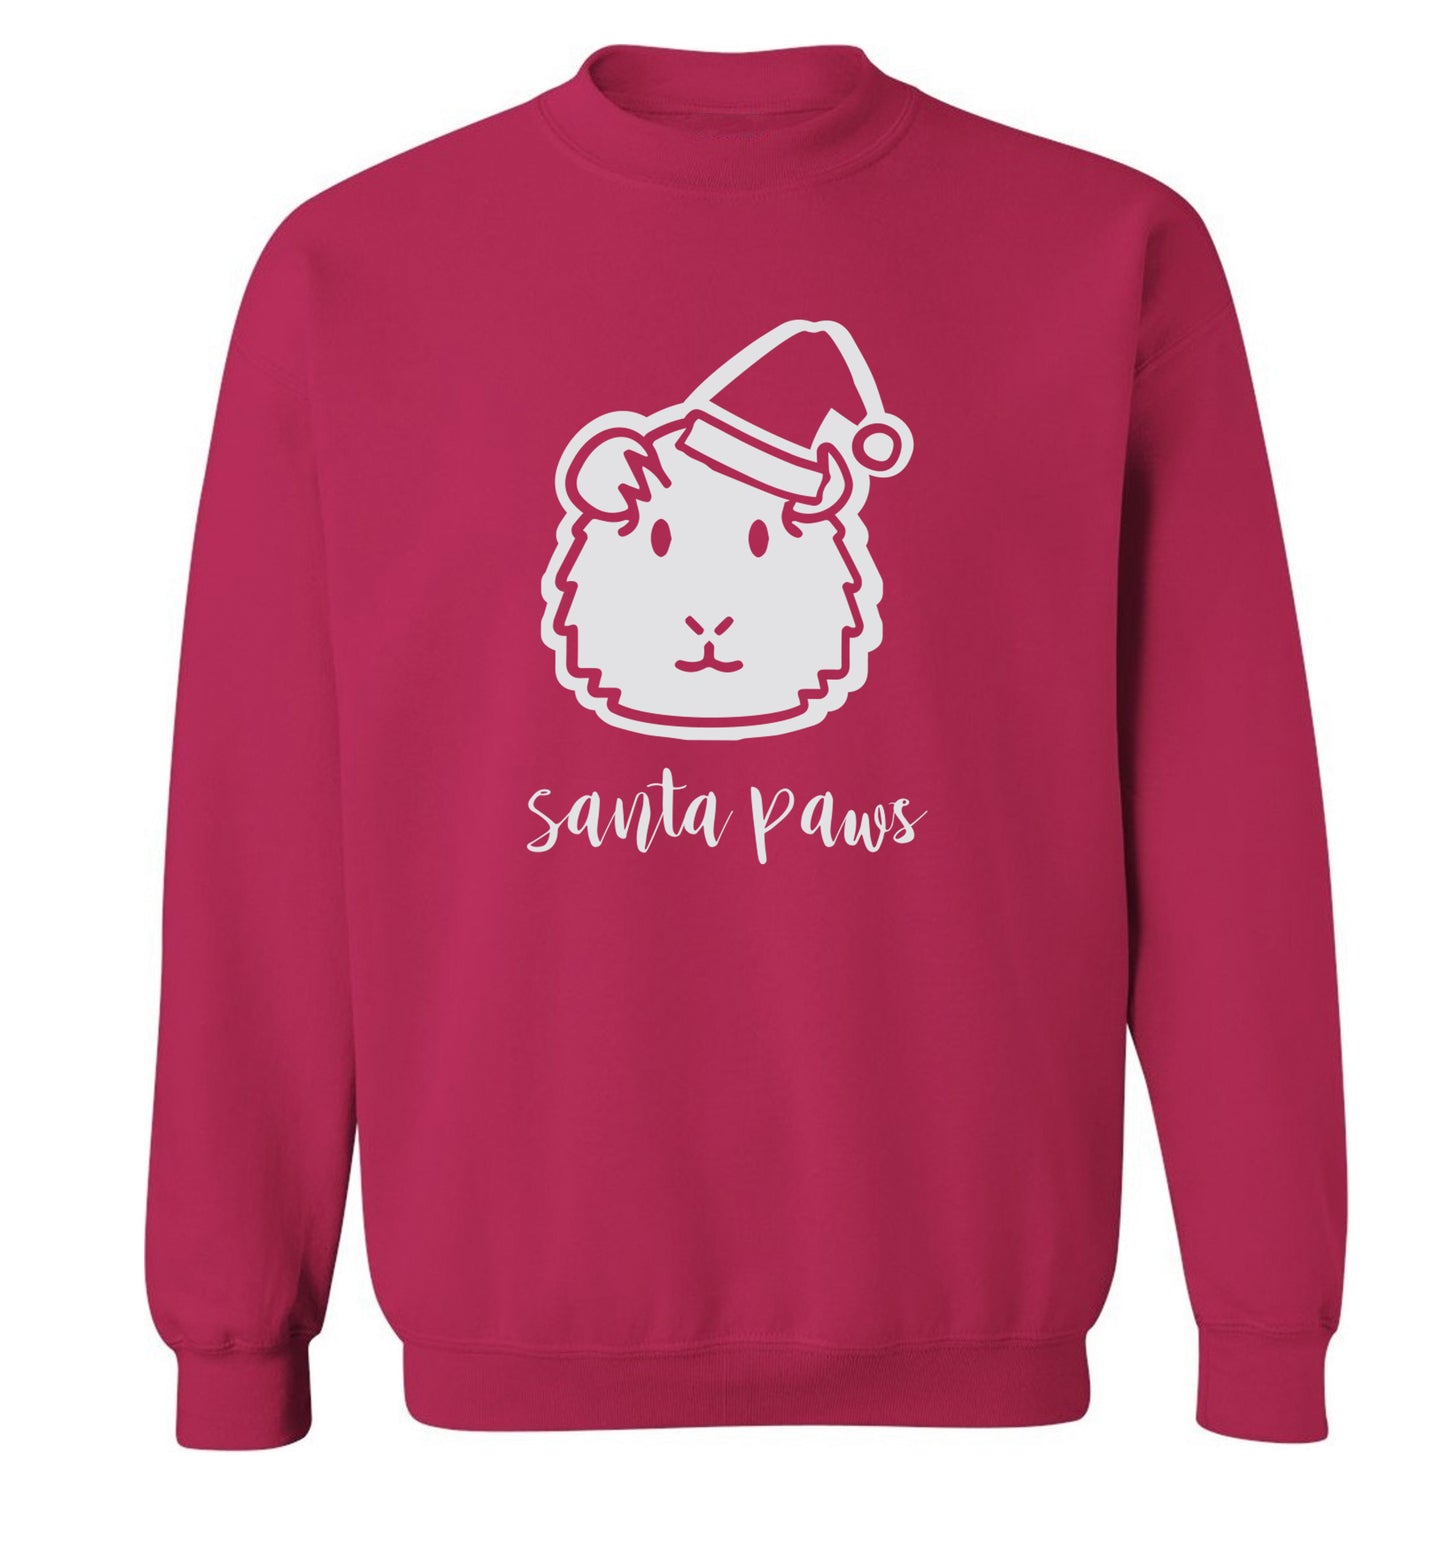 Guinea pig Santa Paws Adult's unisex pink  sweater XL